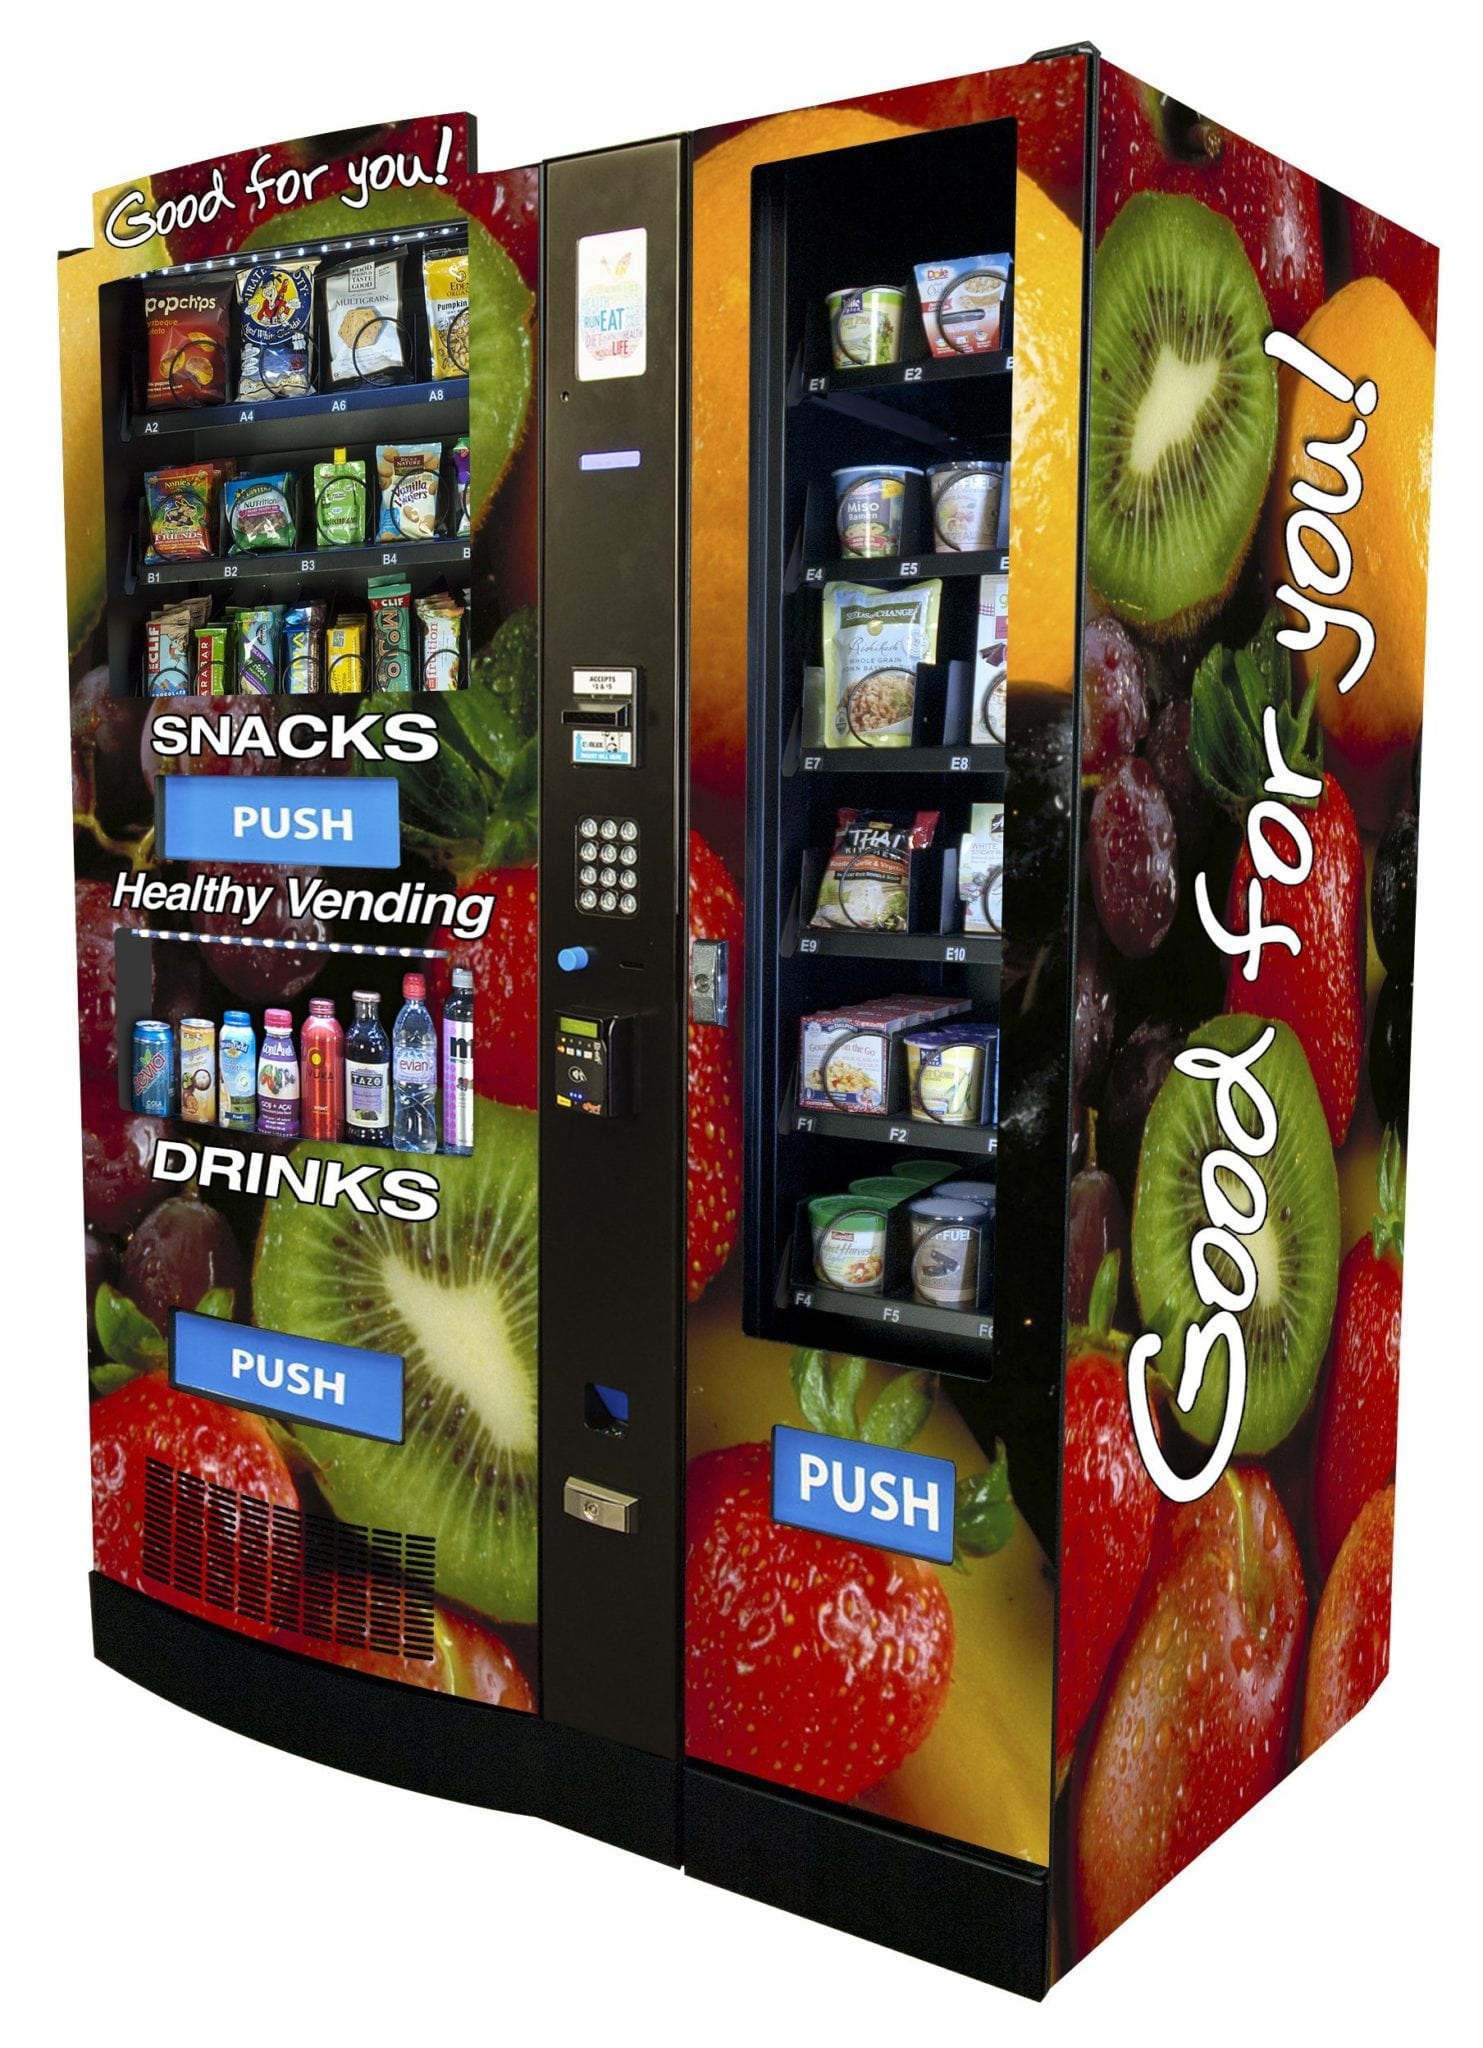 10 Reasons To Add SmartMart To Your HealthyYOU Vending Machine